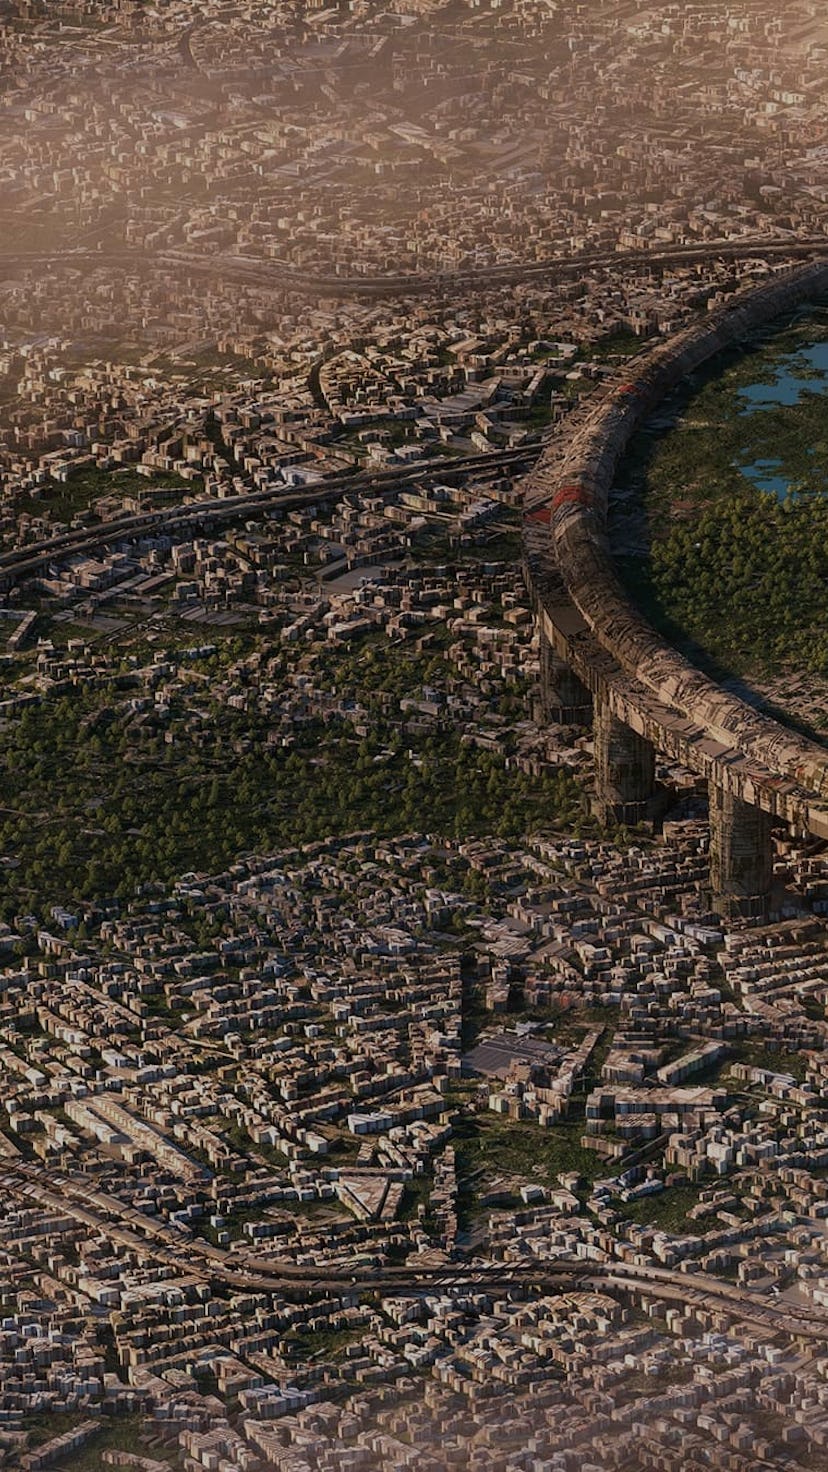 Graphic artist InwardSound creates detailed rendering of a city.